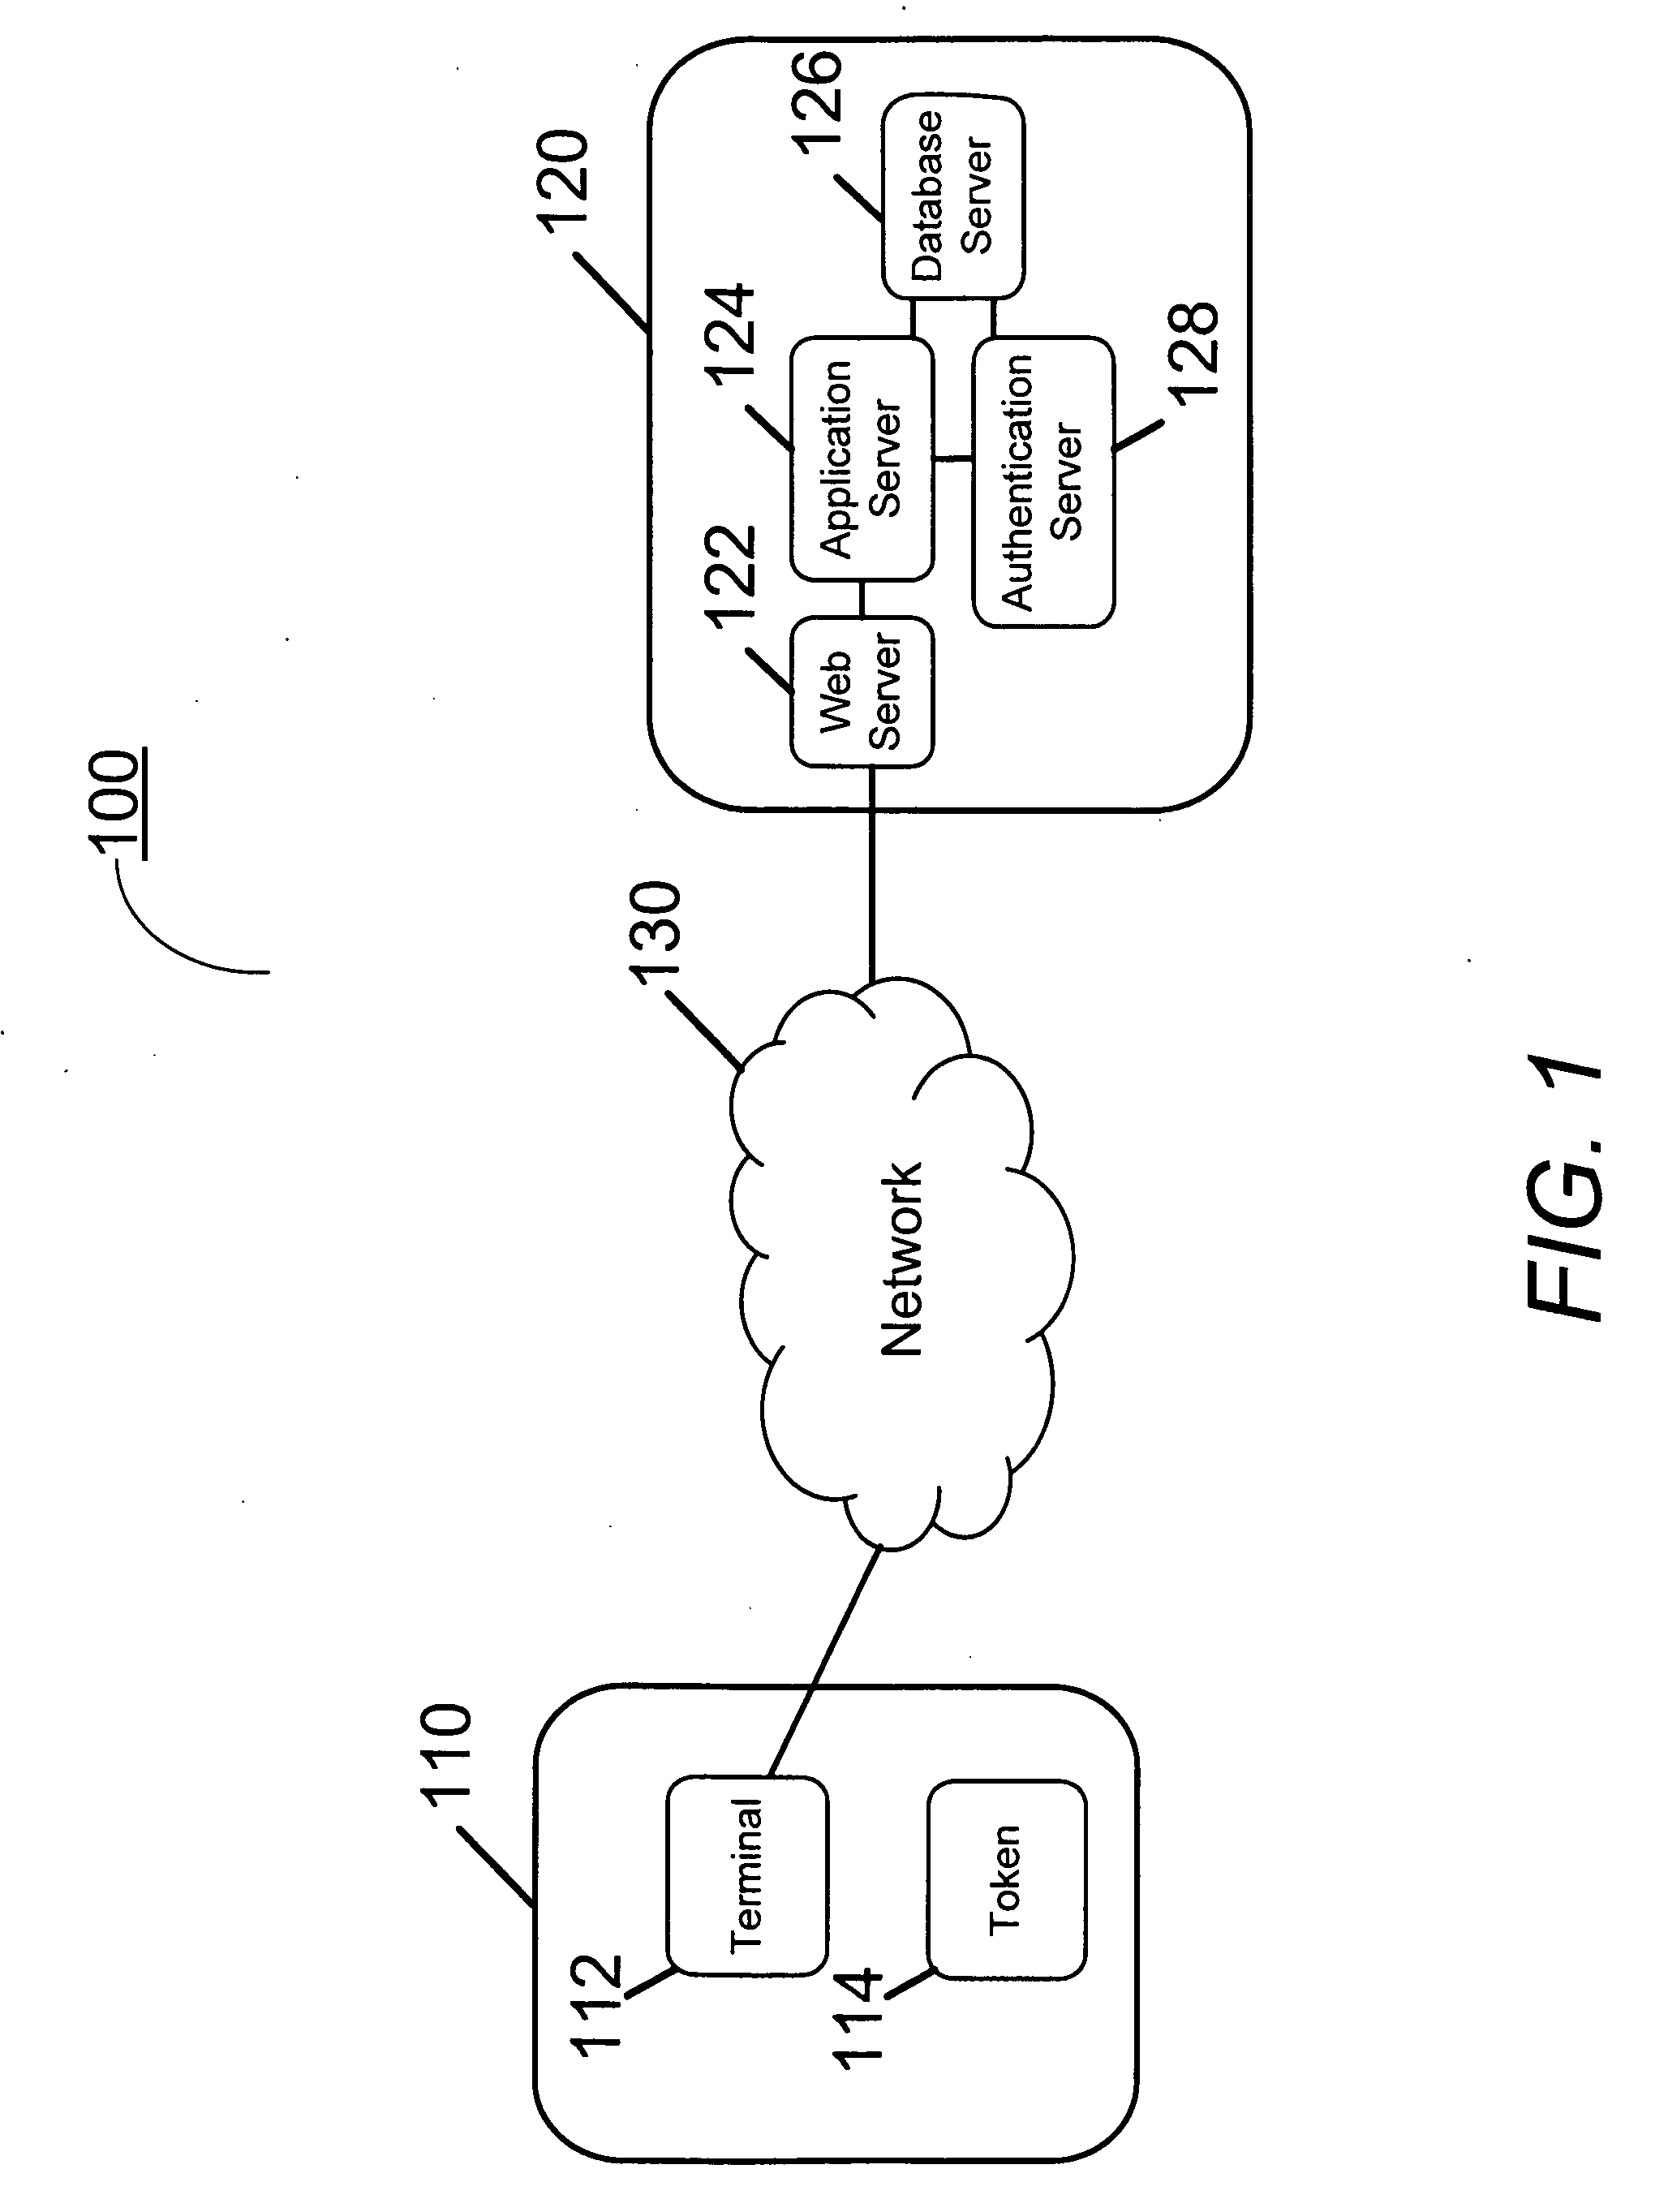 Mutual authentication and secure channel establishment between two parties using consecutive one-time passwords